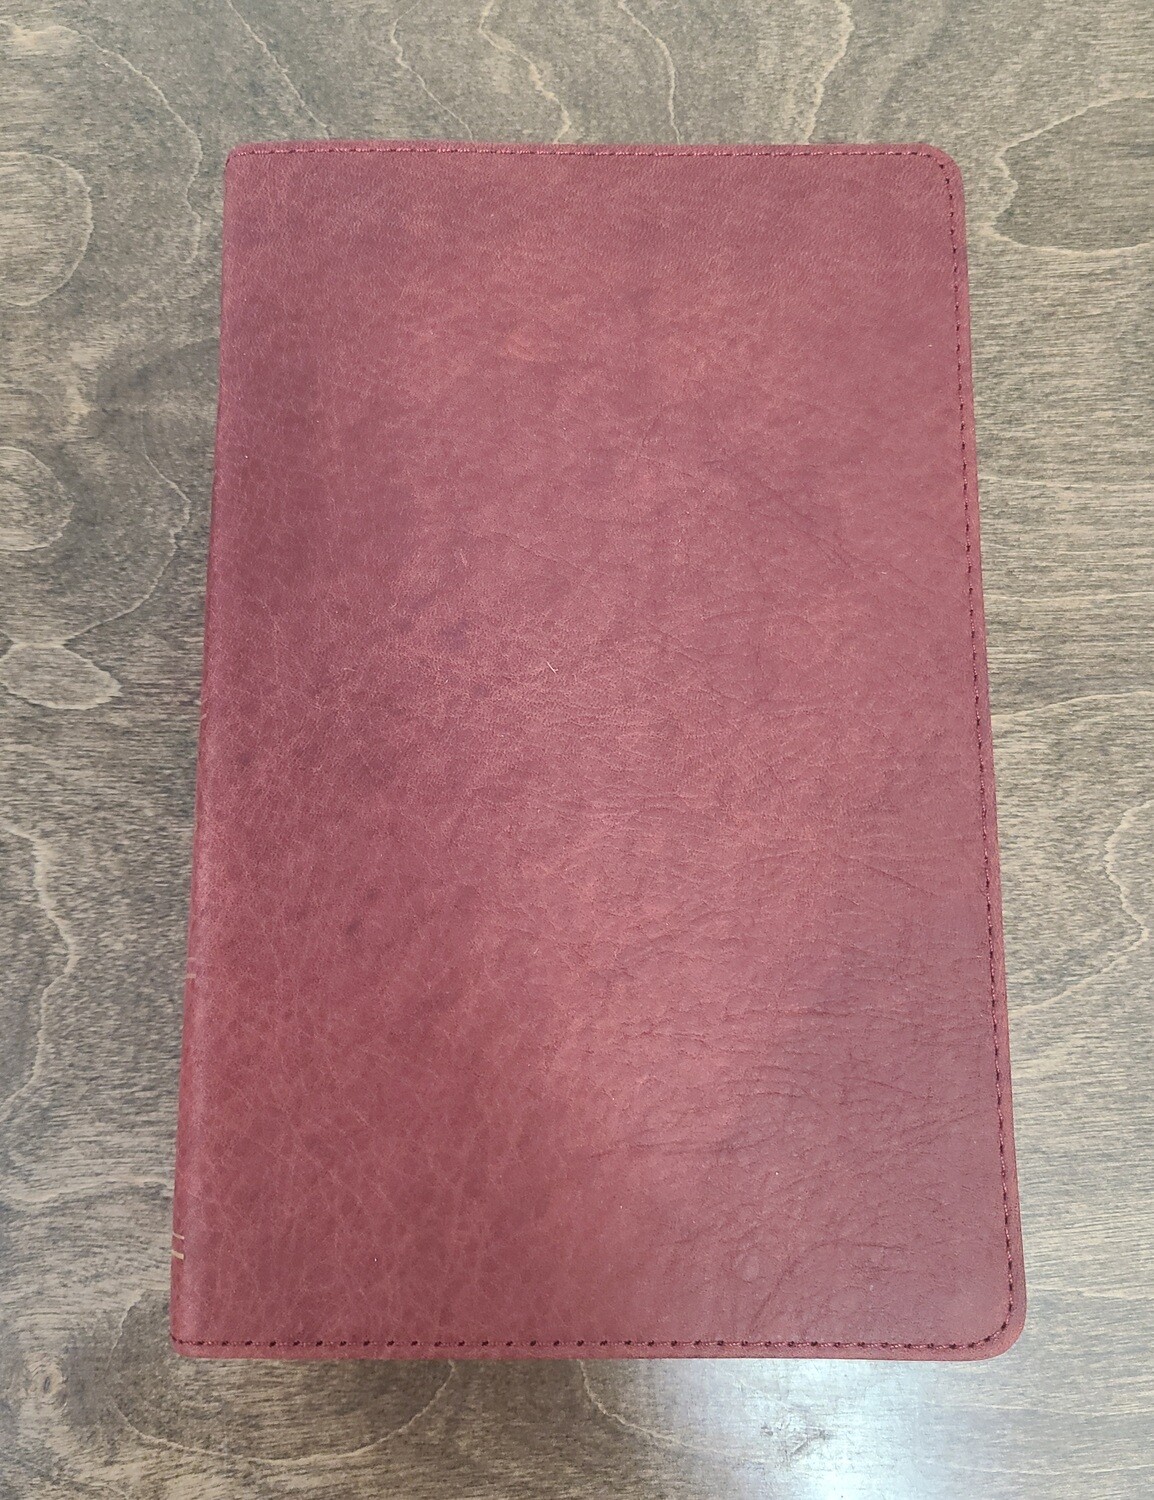 Burgundy Premium Leather KJV Gift Bible with Thumb Indexing